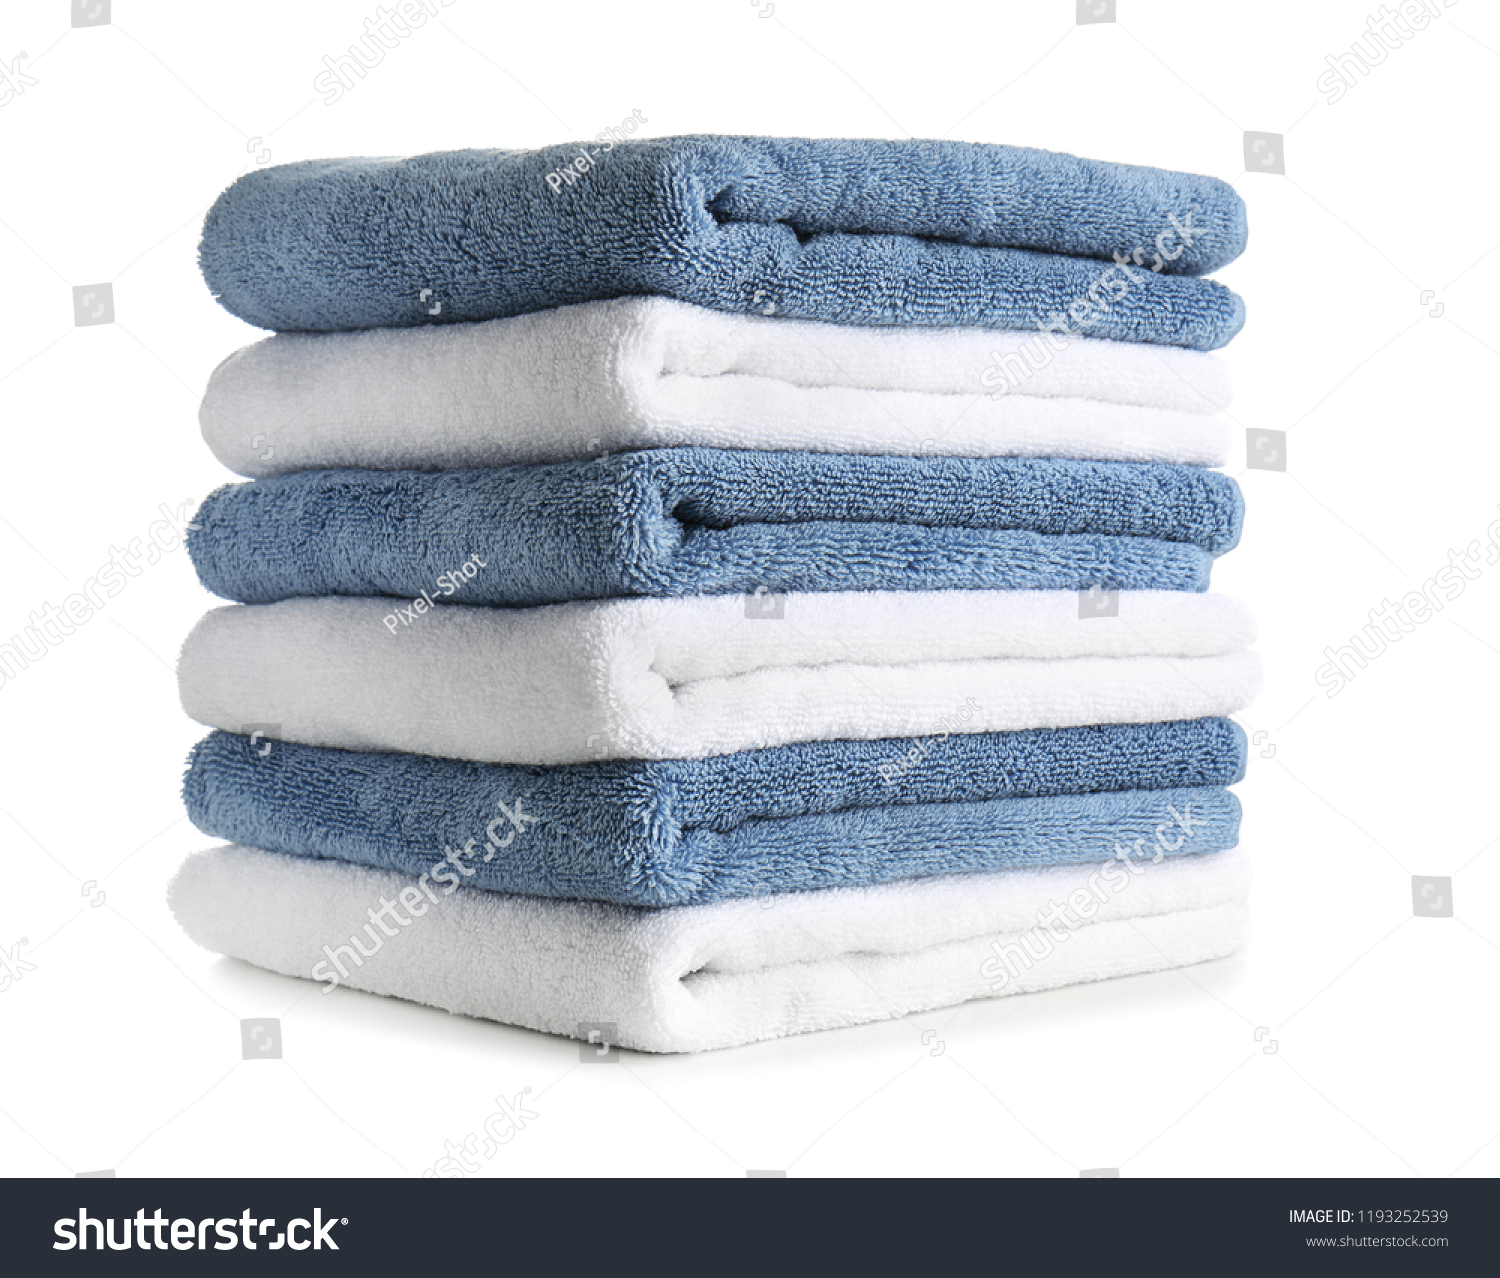 Stack of clean soft towels on white background #1193252539